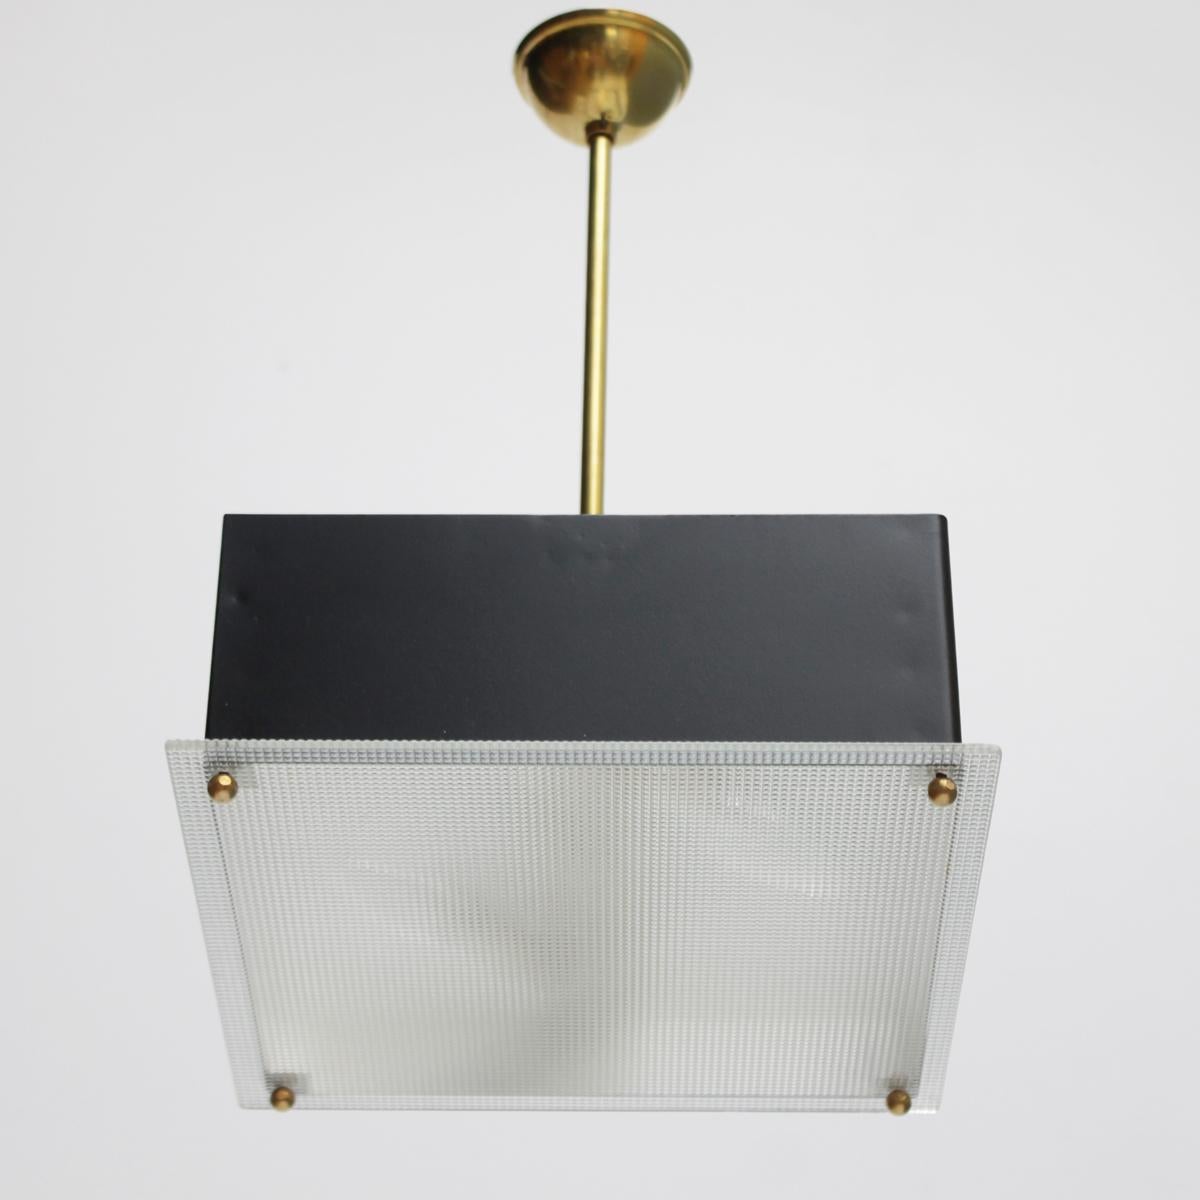 Small French Modernist hanging lamp by Maison Arlus, 1950s. Beautiful and elegant 28 because of its simple shape. Black lacquered metal with a glass top and brass details. Good condition.
Two bayonet bulbs (BA15d, IEC 7004-11 A, DIN 49720). The